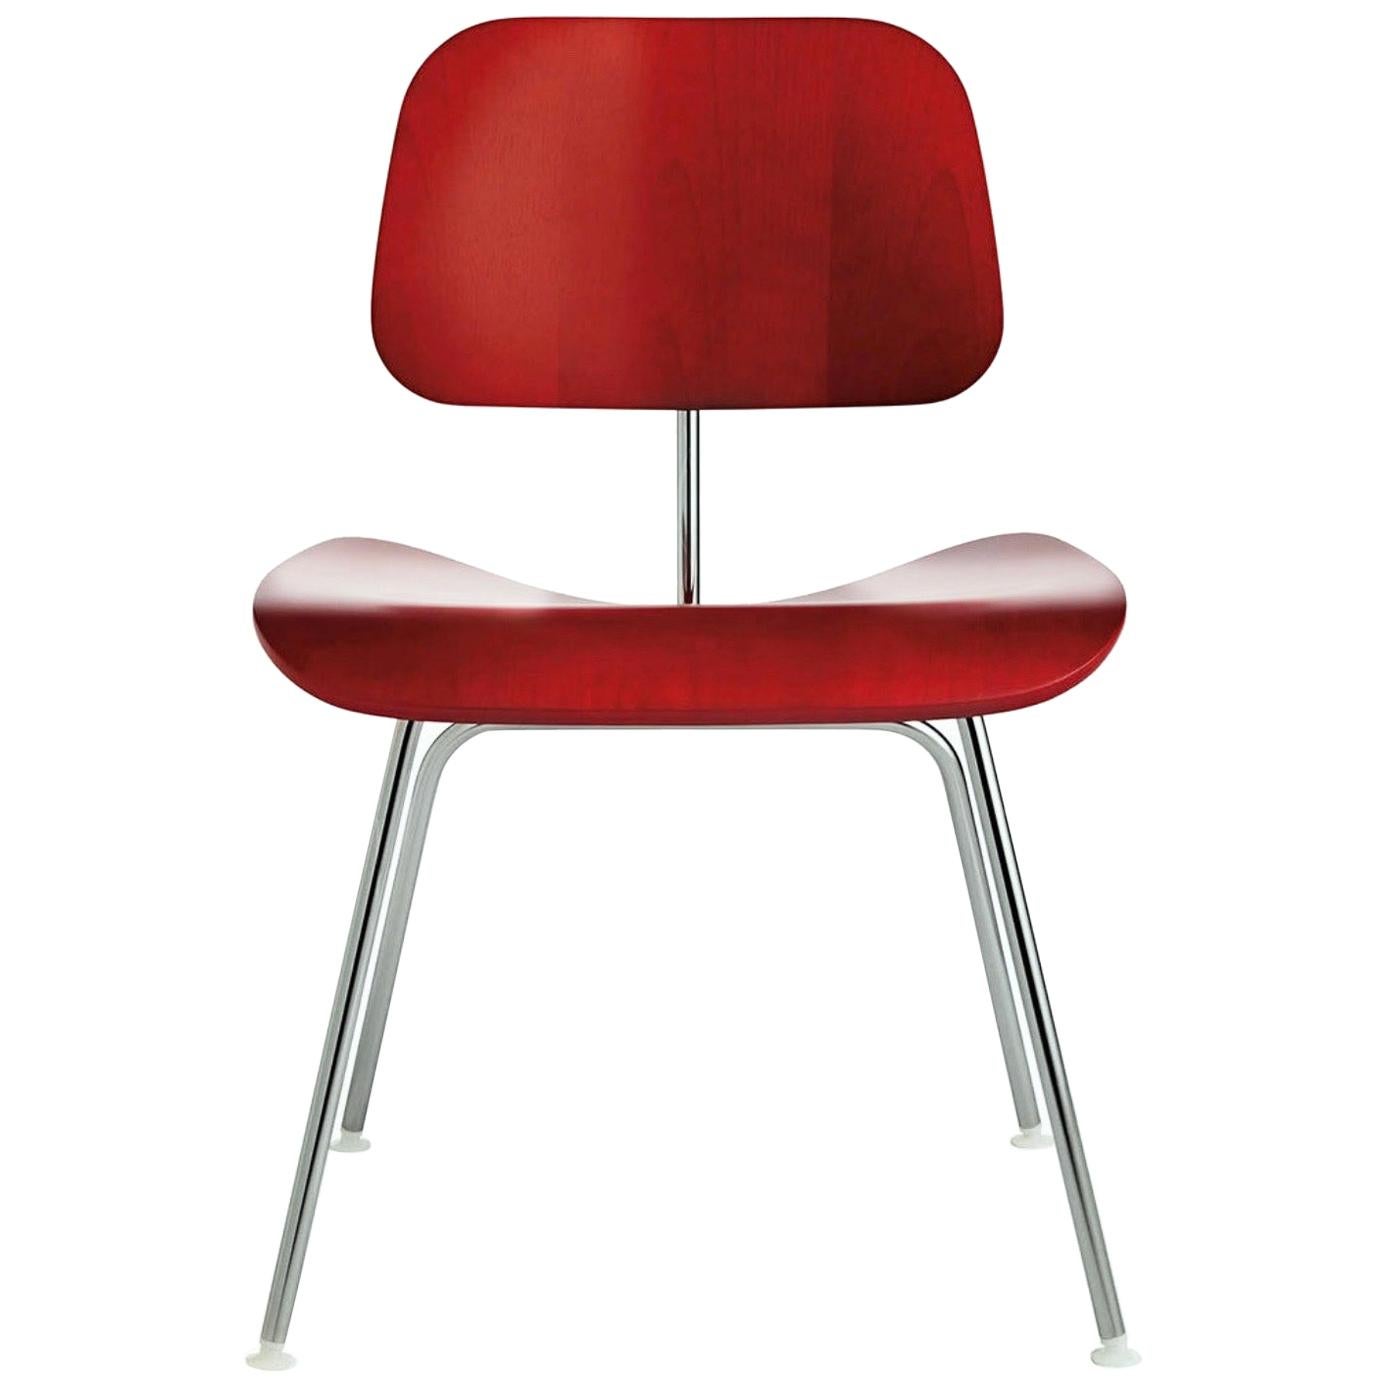 Acier inoxydable Chaise DCM Charles and Ray Eames, Herman Miller, Dining, Chaise d'appoint en hêtre rouge